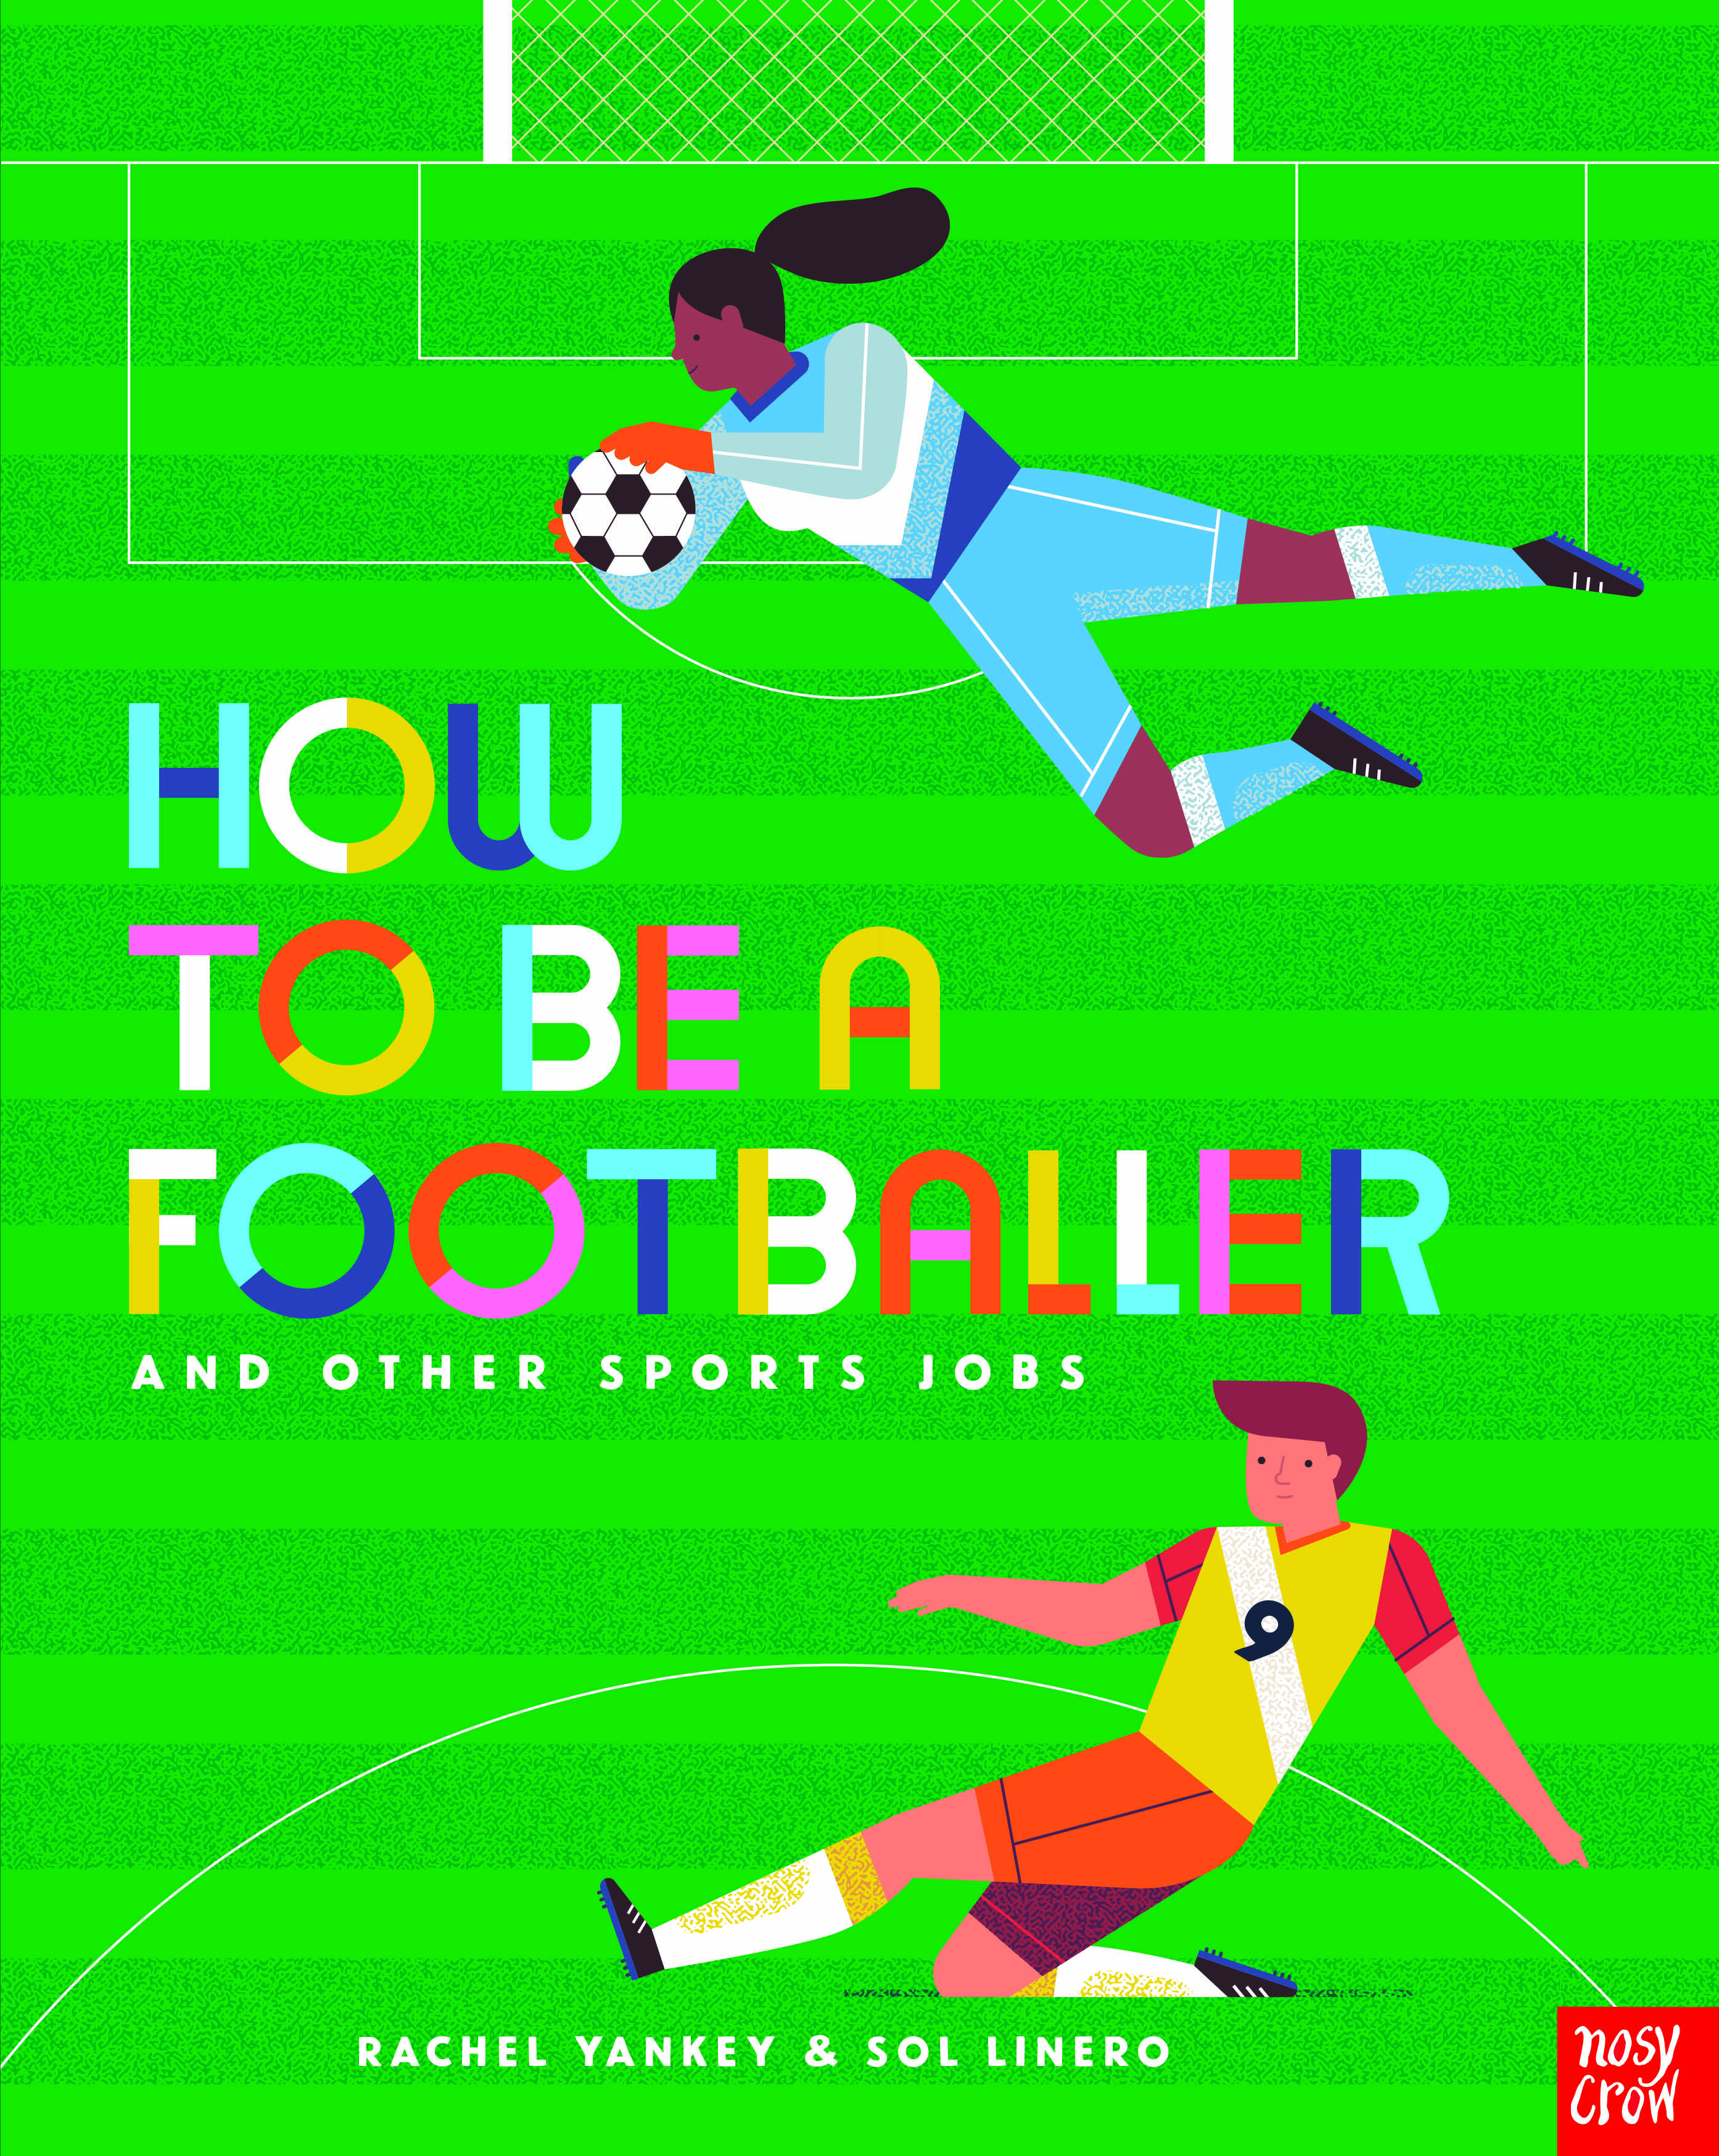 How To Be A Footballer by Rachel Yankey